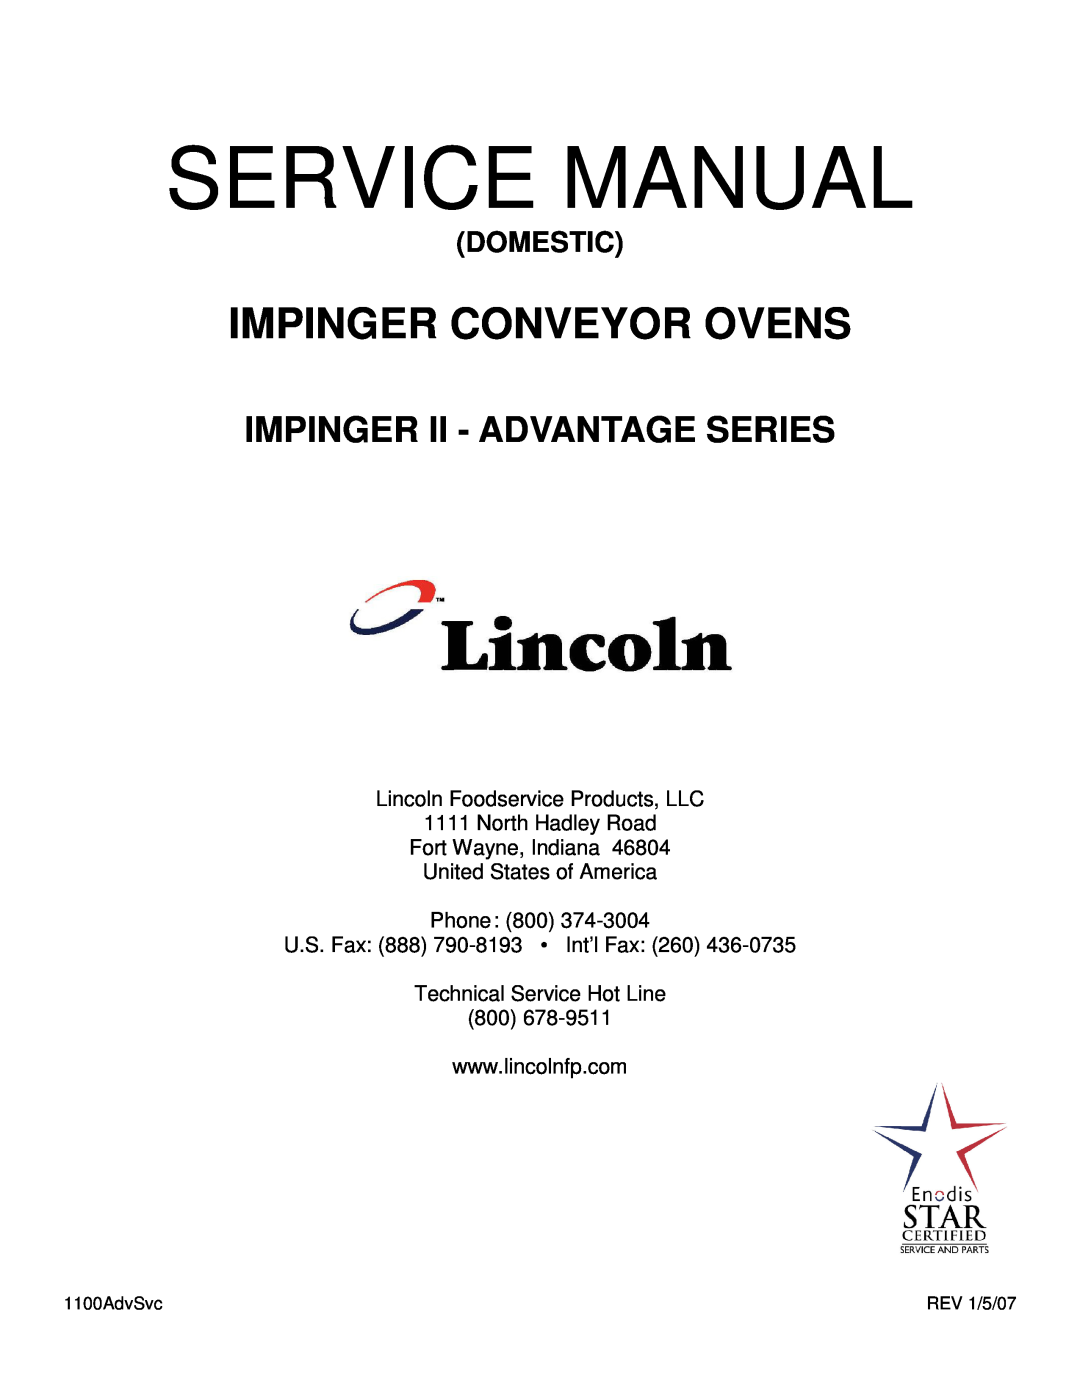 Lincoln 116-000-A service manual Lincoln Foodservice Products, LLC, North Hadley Road Fort Wayne, Indiana, Service Manual 